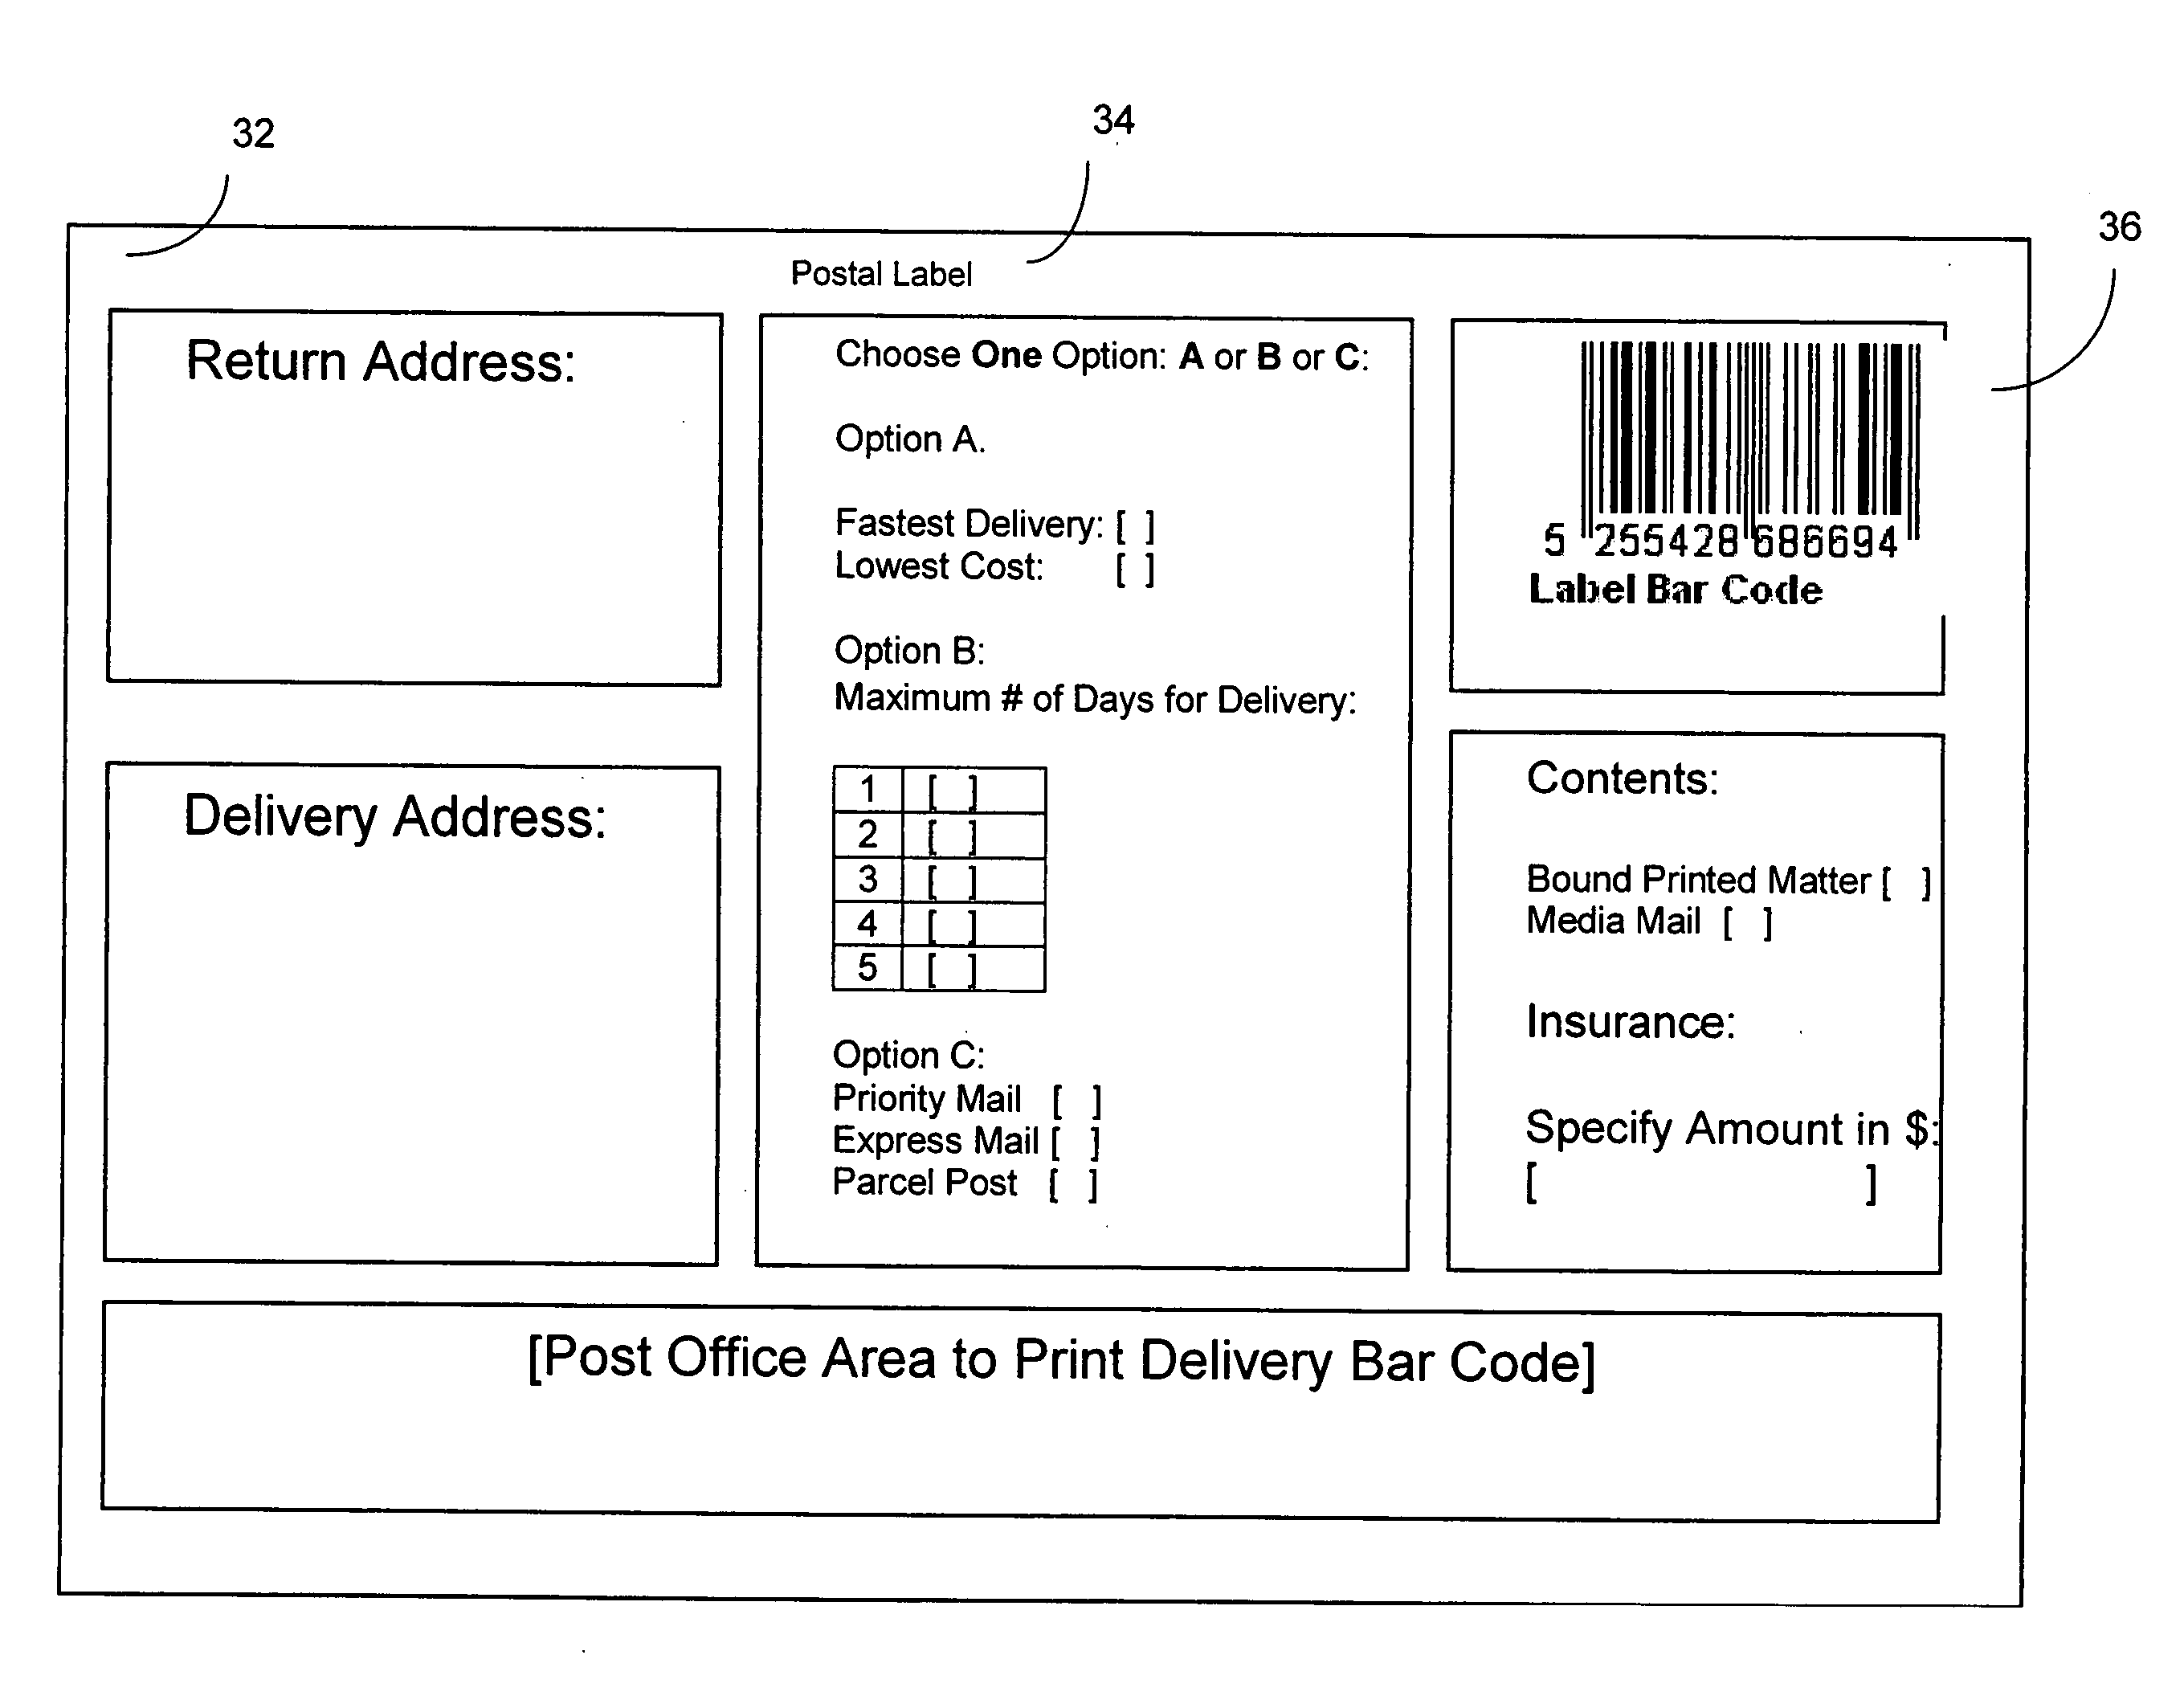 System and method for variable price postage stamp and billing